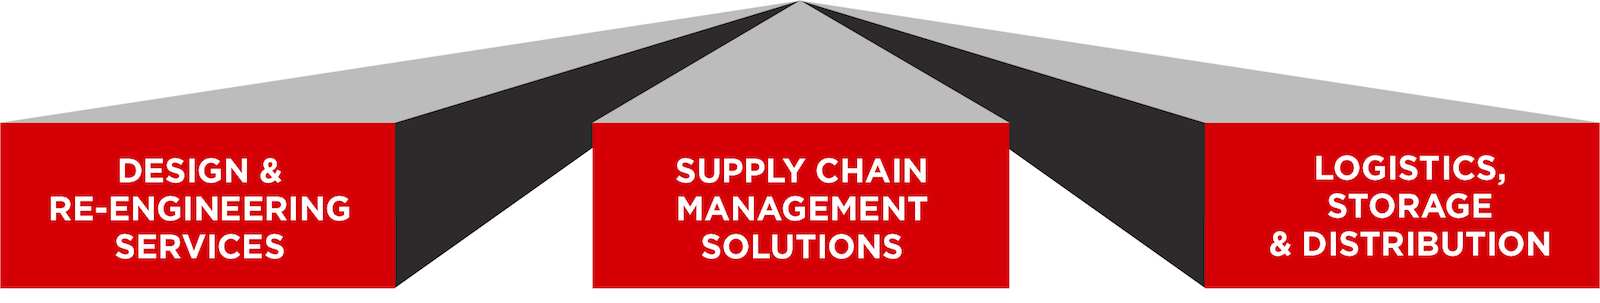 COMPLETE SUPPLY CHAIN MANAGEMENT